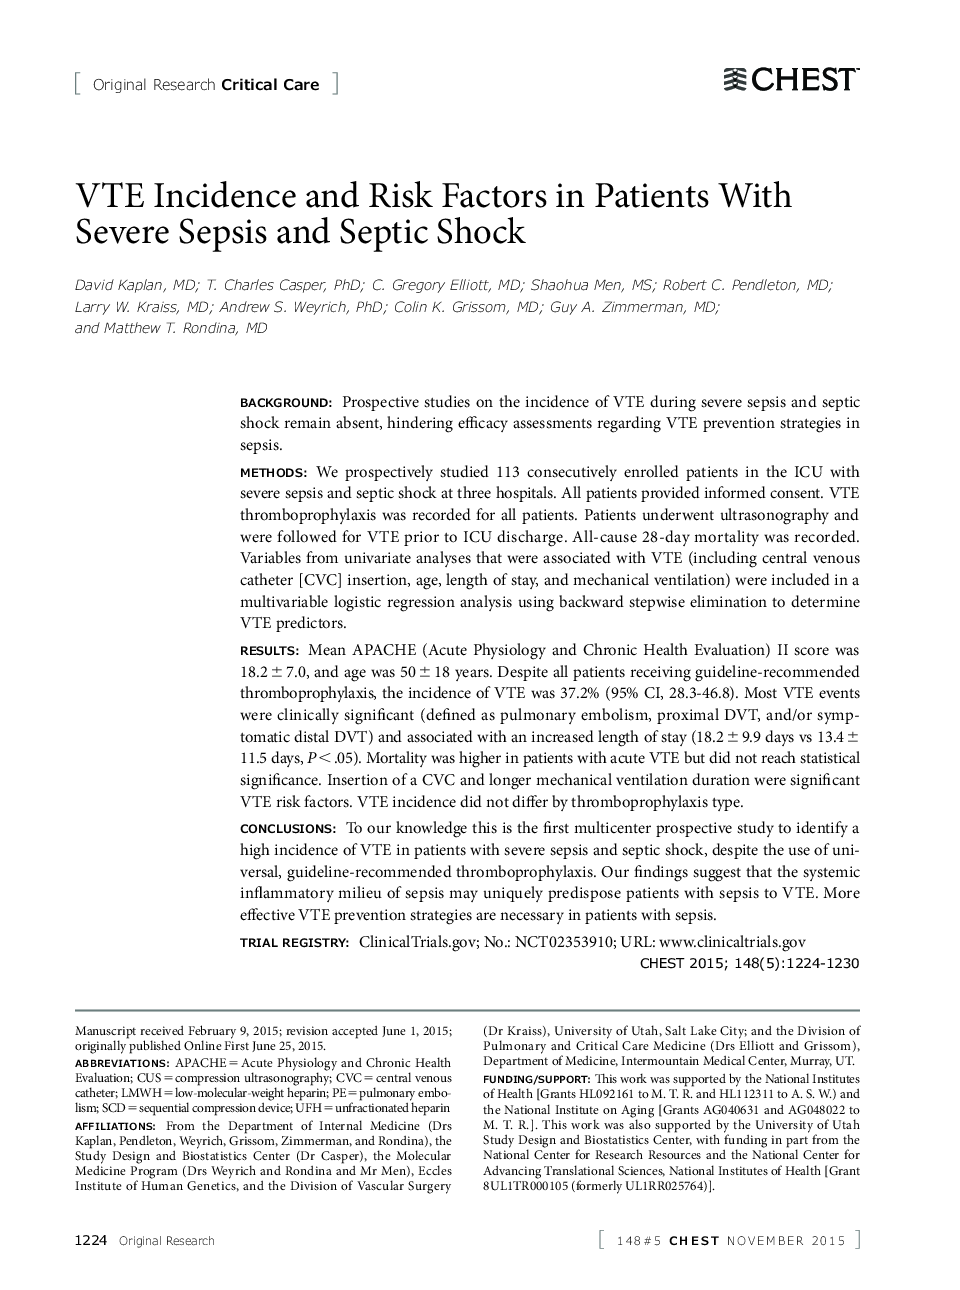 VTE Incidence and Risk Factors in Patients With Severe Sepsis and Septic Shock